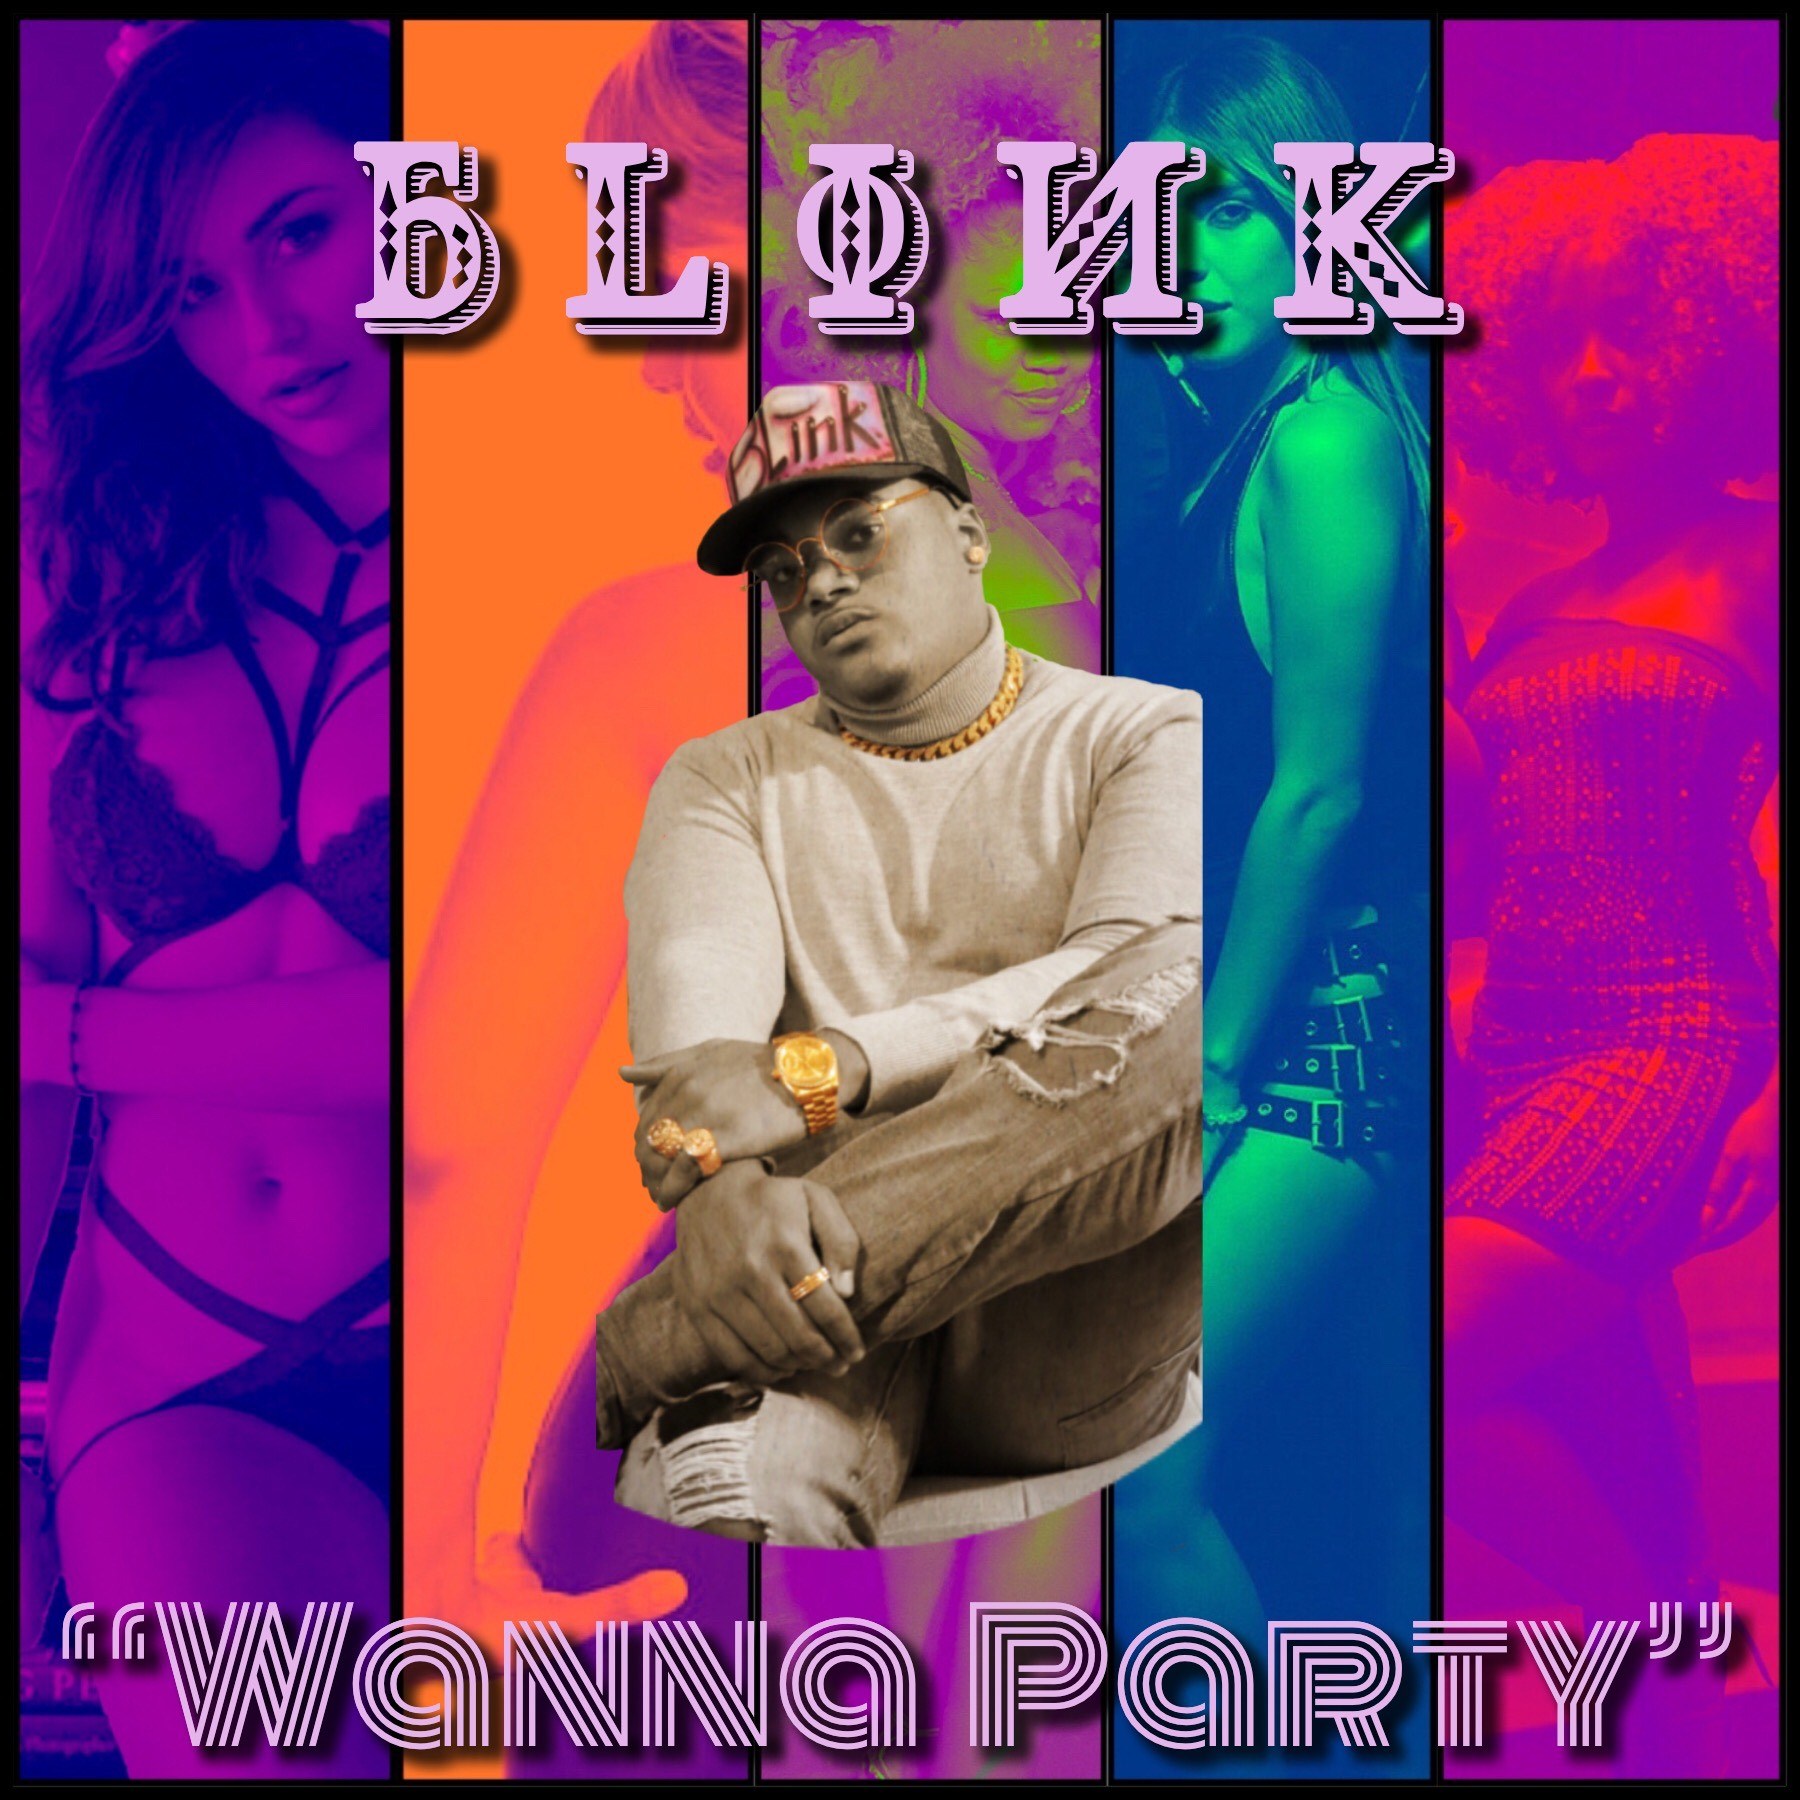 Blink Blesses Us With Good Vibes On Latest Release, “Wanna Party”